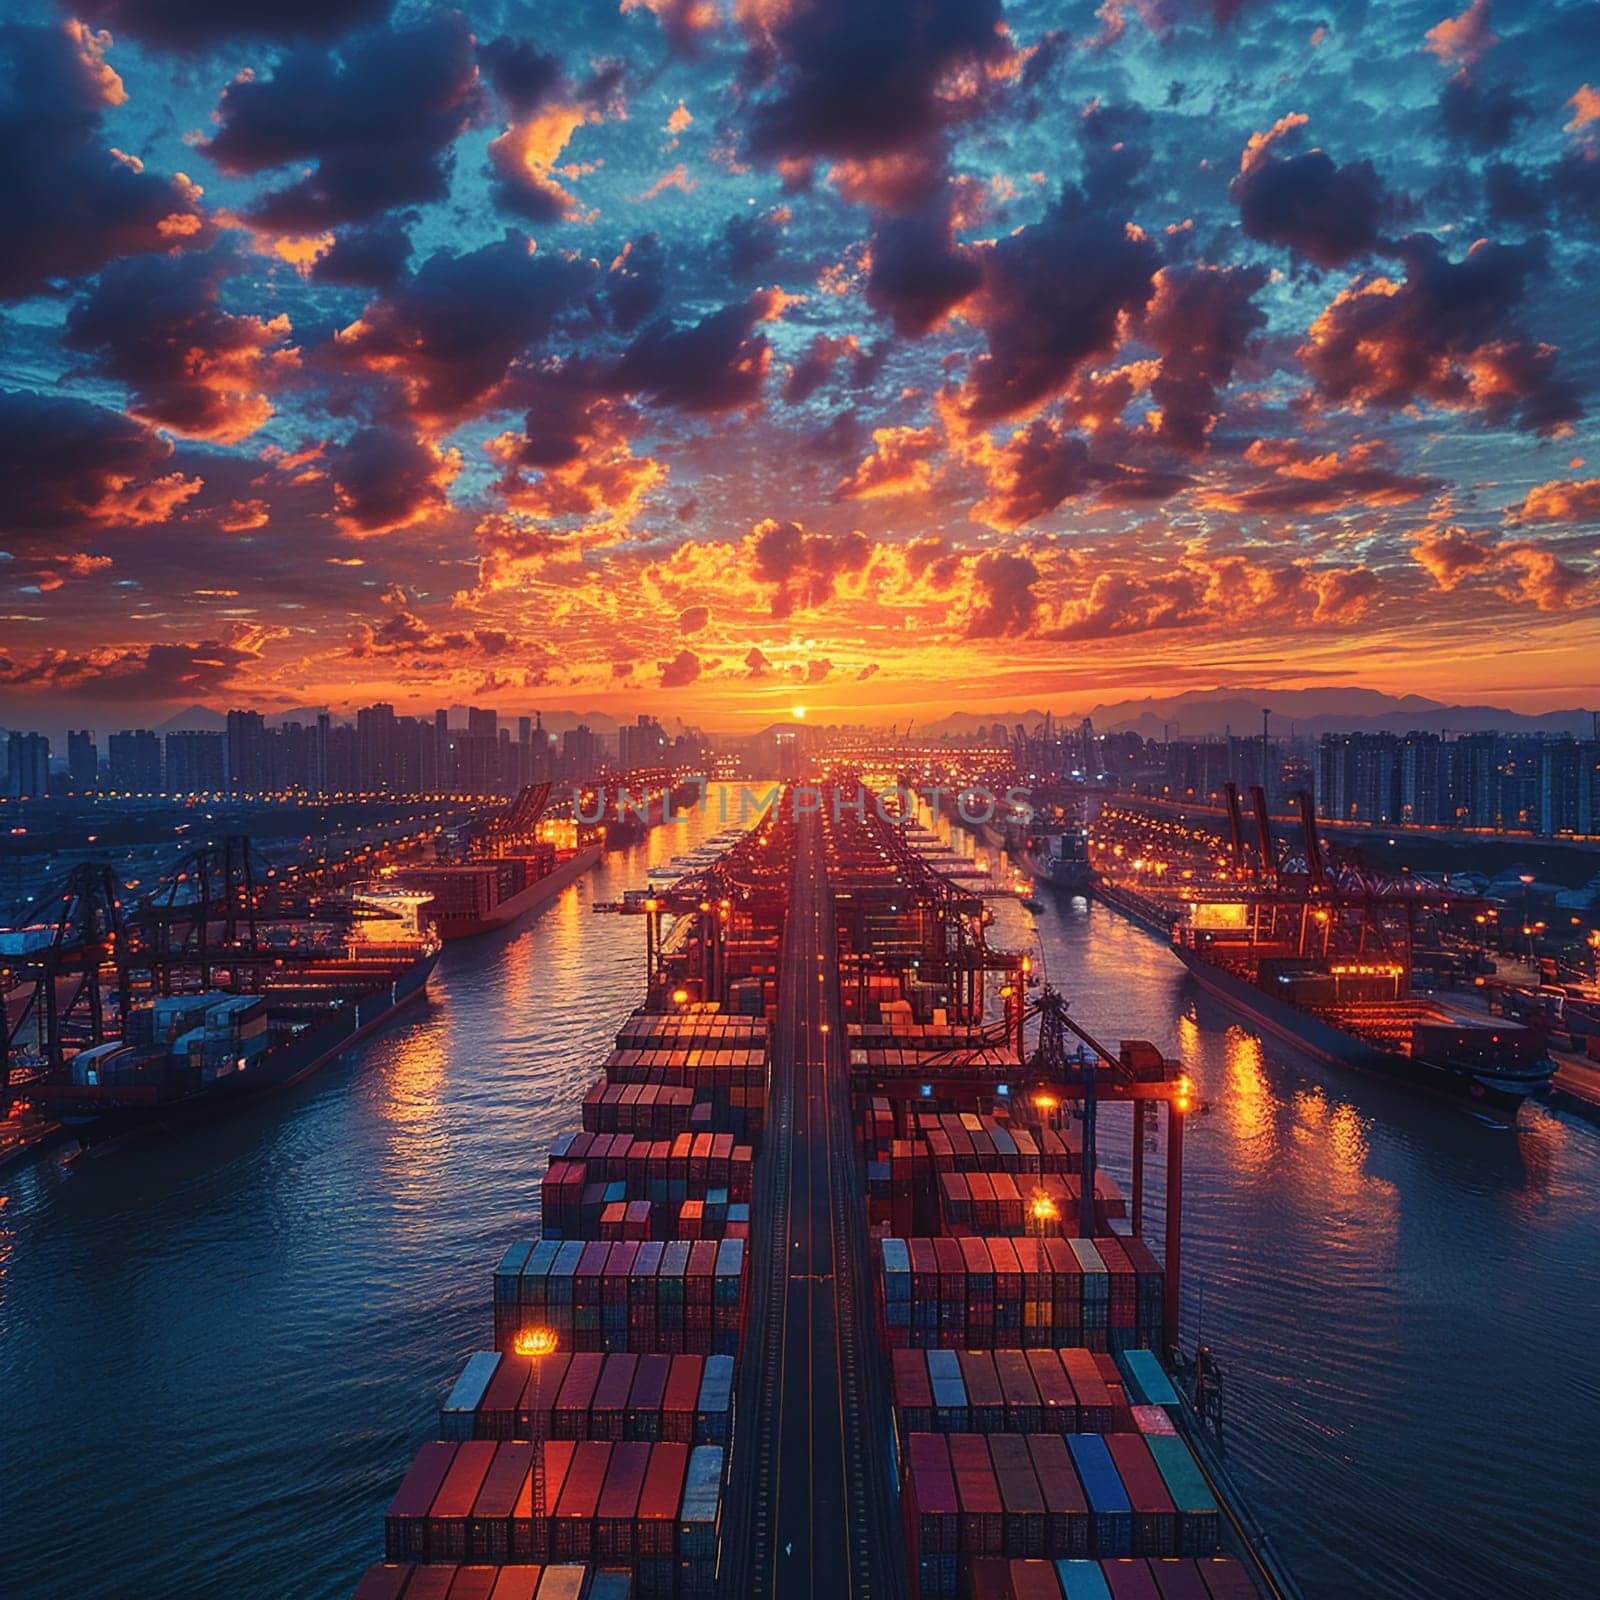 Business Shipping Operations Managed Efficiently at Bustling Port, Cargo ships and cranes set the scene for a narrative of global trade and business logistics.